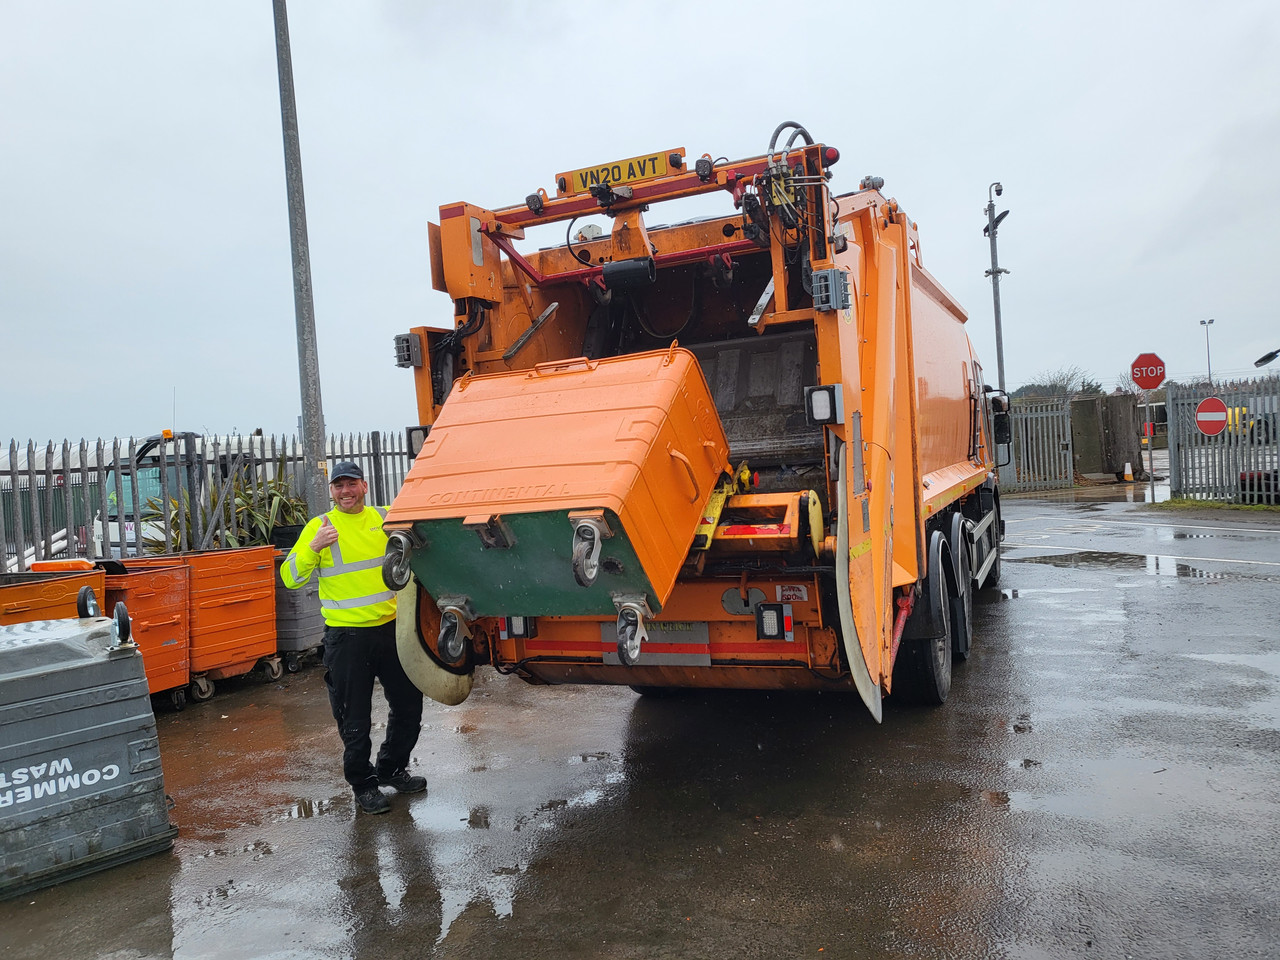 Commercial bin wagon in action with commercial bin operative